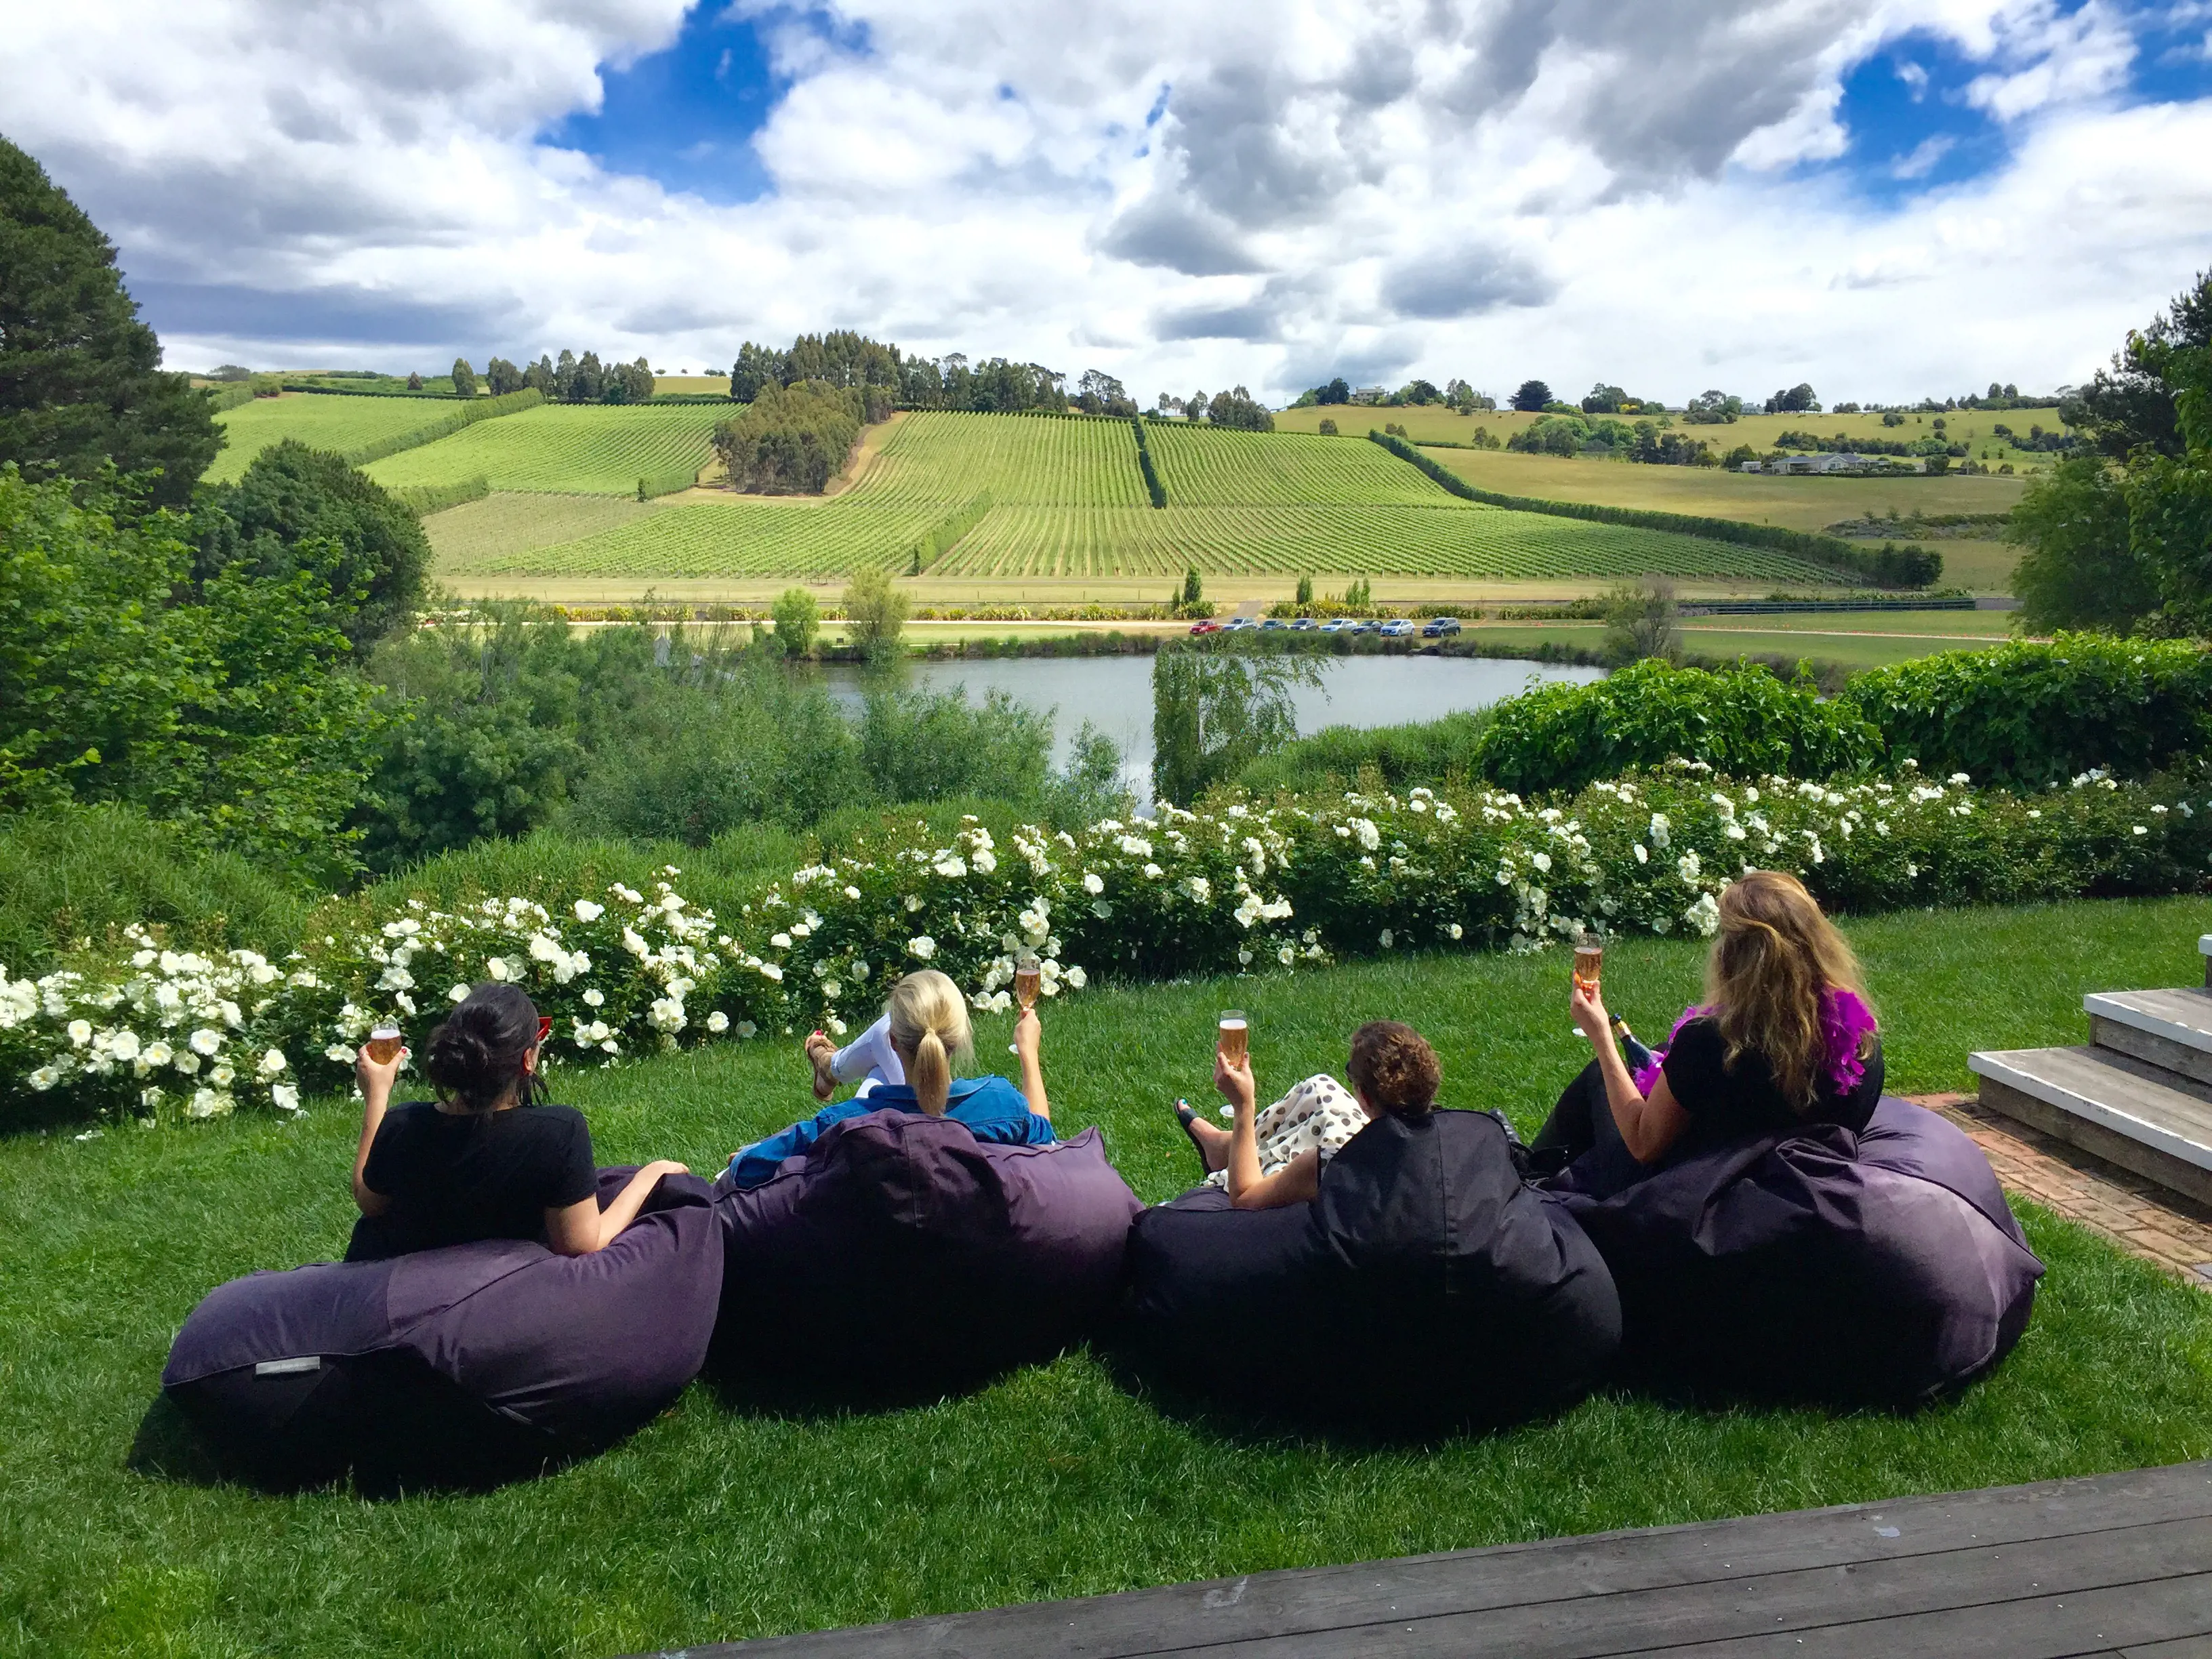 Four ladies enjoy a glass of wine while sitting in comfy bean bags at Josef Chromy Wines - Effervescence Tasmania, looking out to the lush greenery.